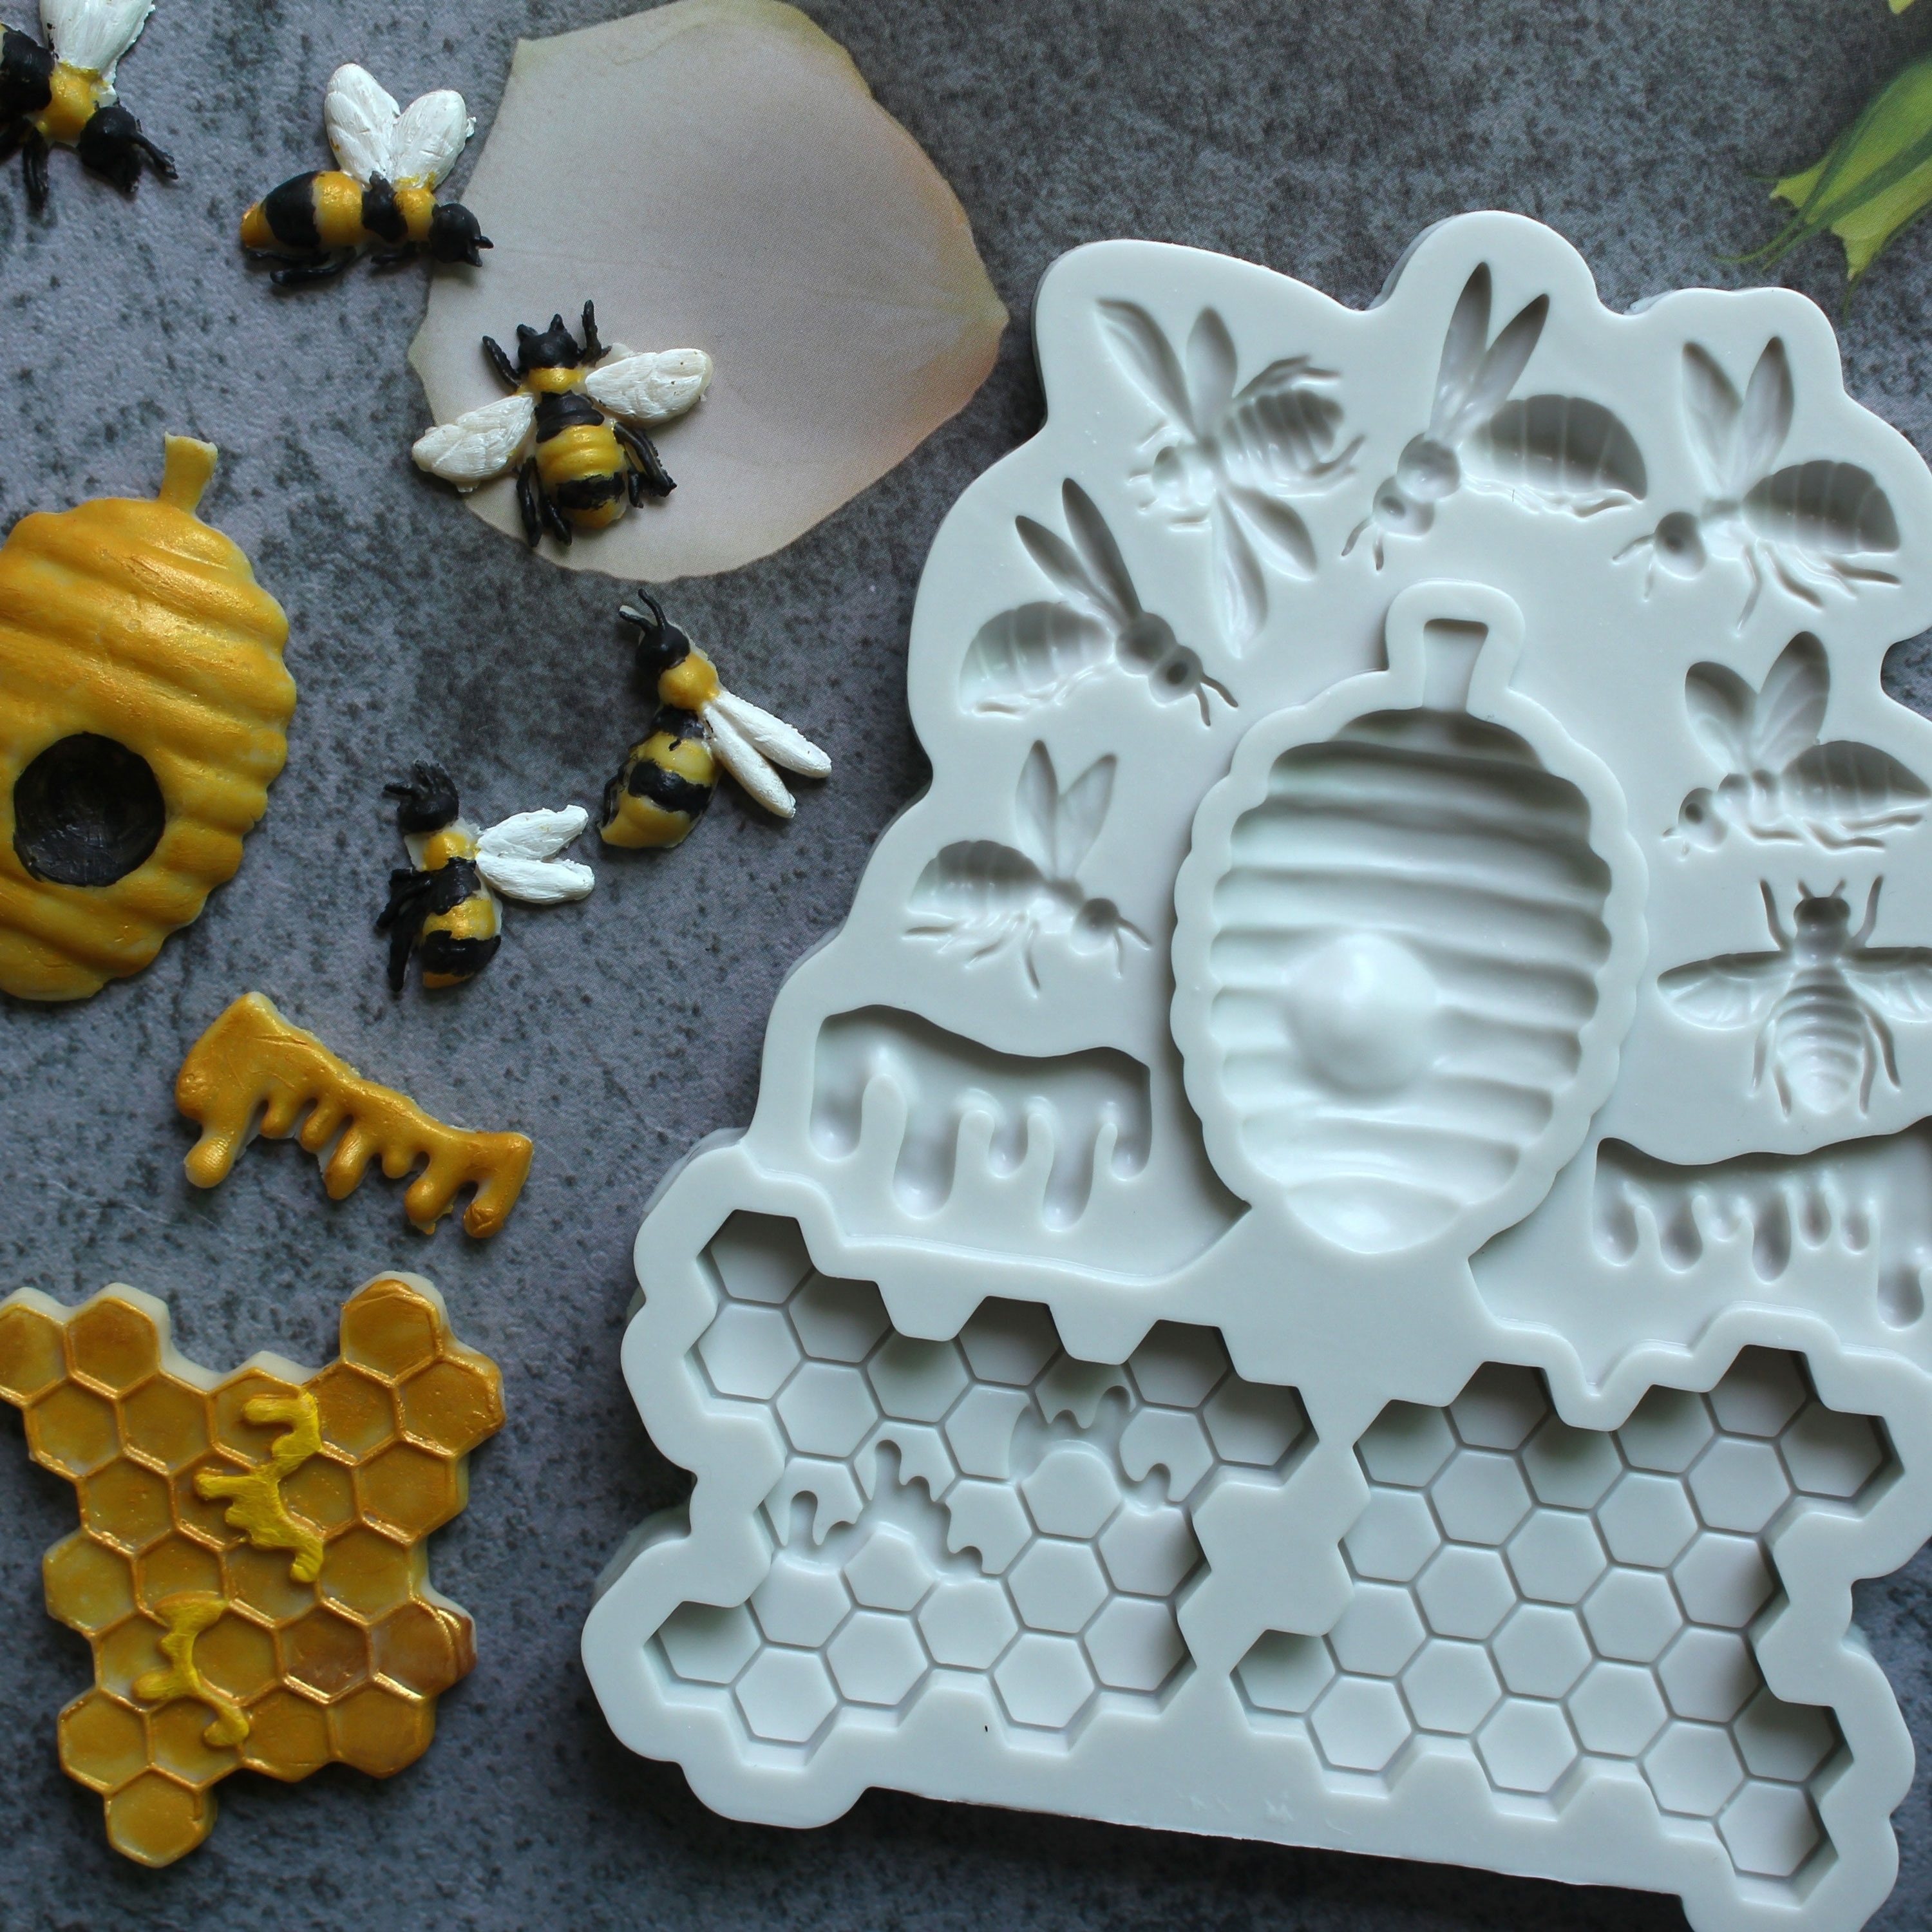 Honeycomb Soap Mold 3D Bumble Bee Stamp For Handmade Lotion Bars Honeybee  Wax Melts Bath Bomb Chocolate Dessert Decoration Tools